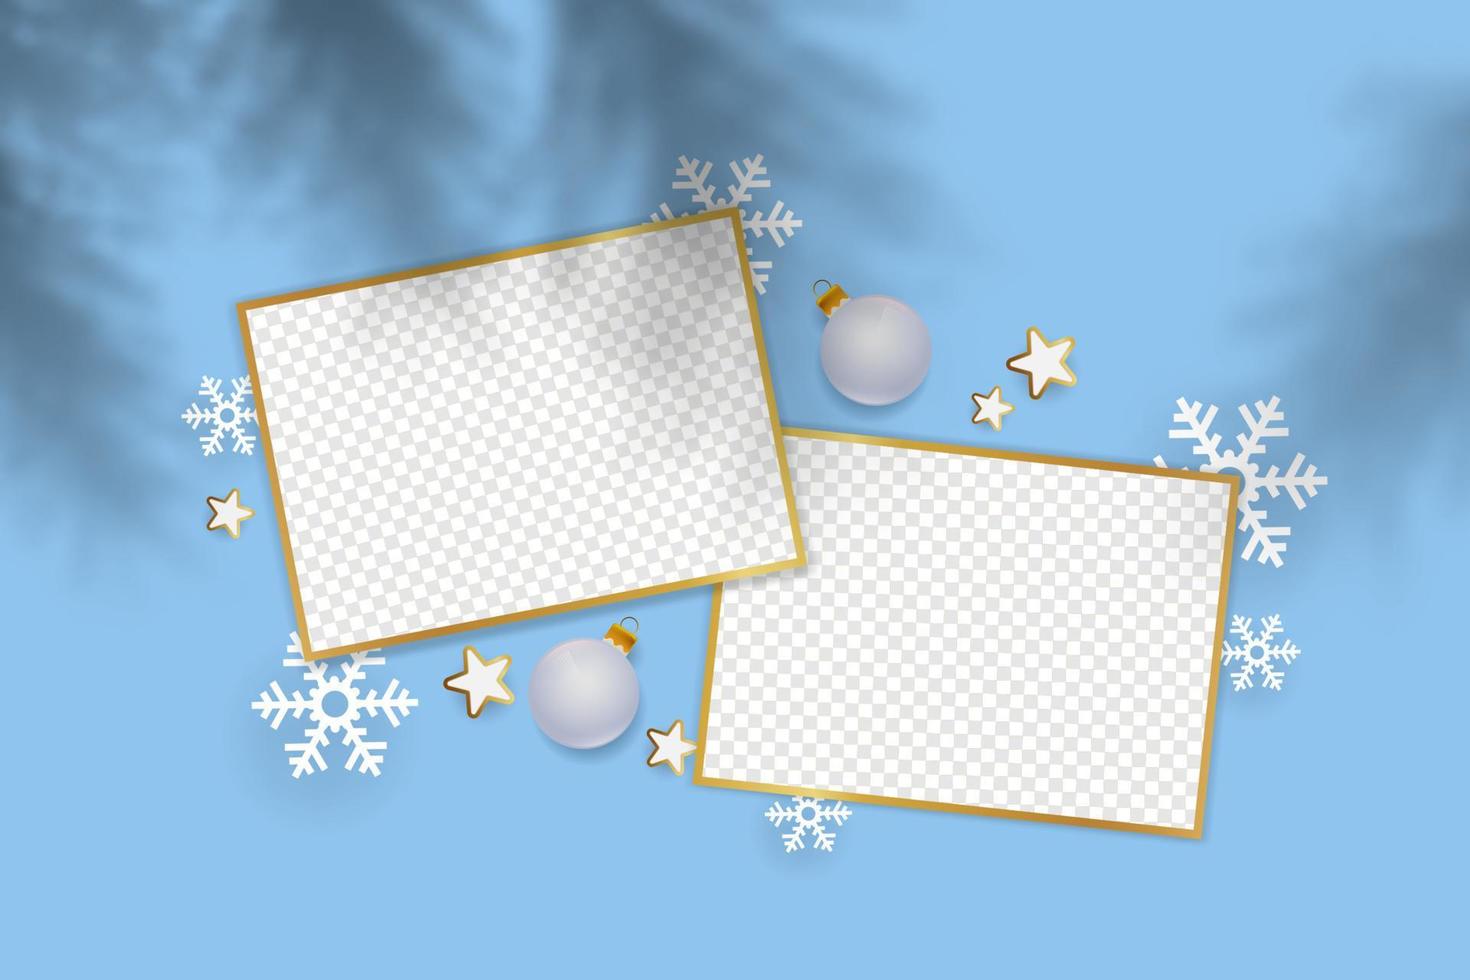 Christmas decorations with frames for photos vector